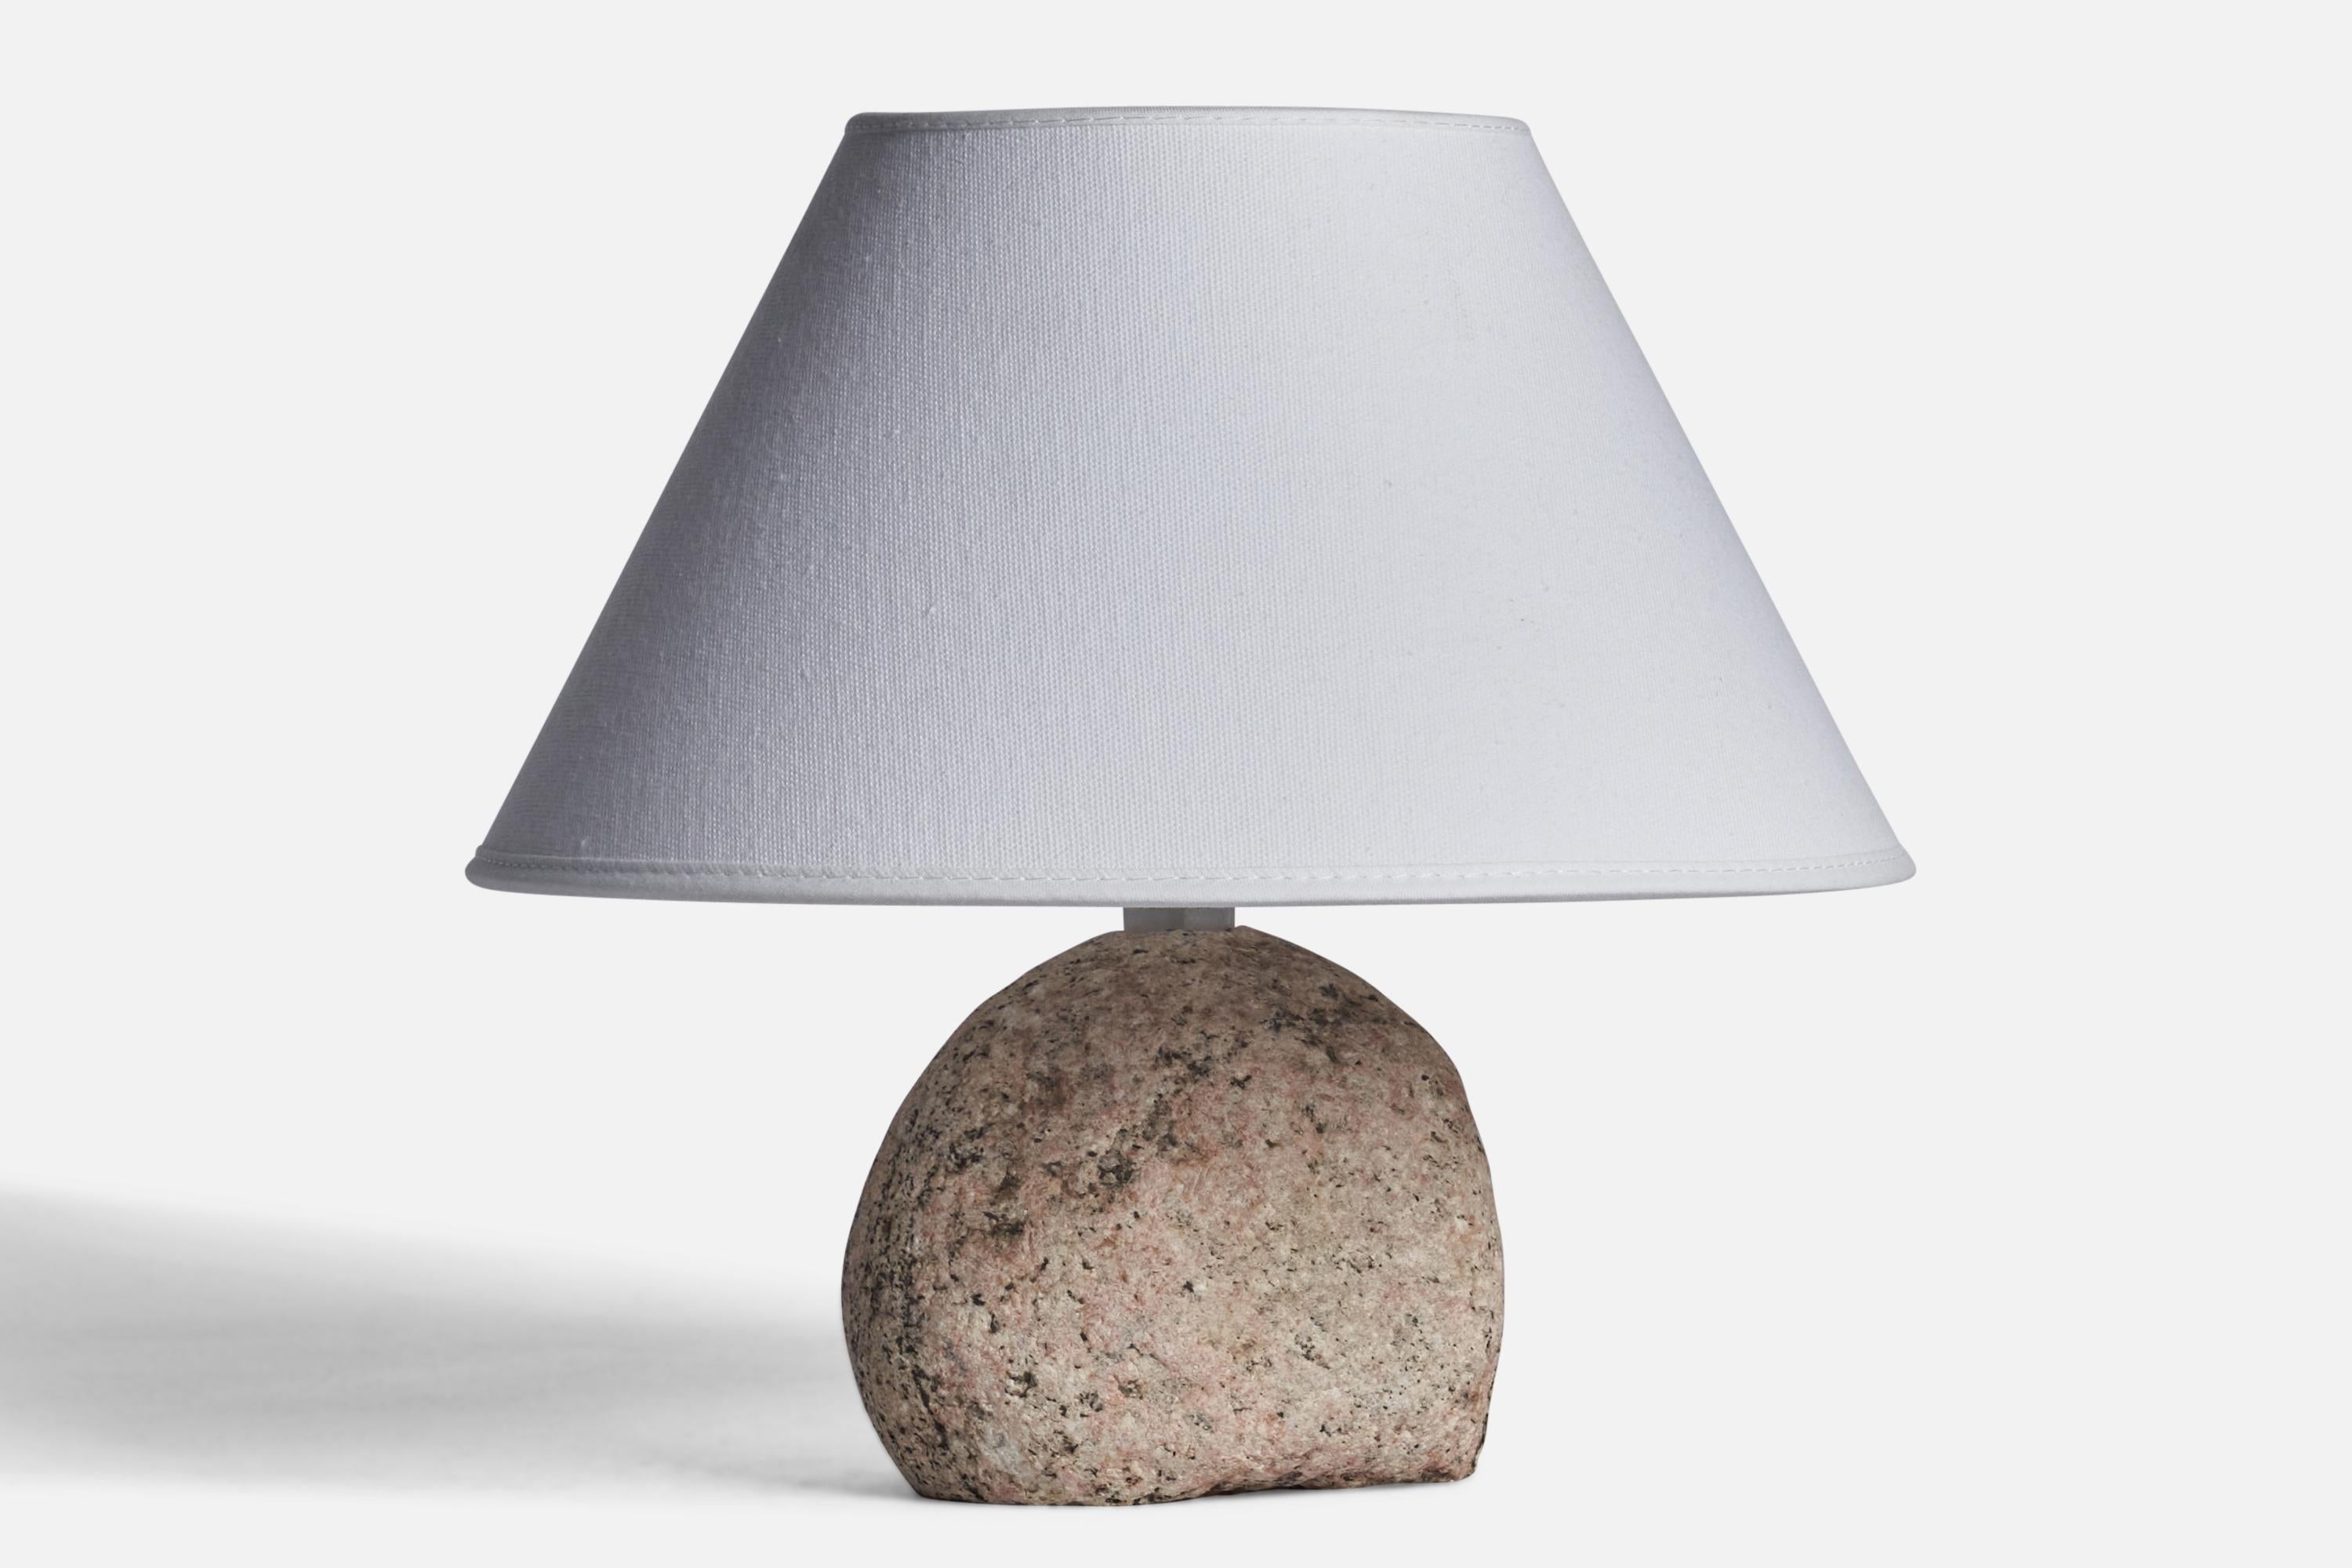 A stone table lamp designed and produced in Sweden, c. 1970s.

Dimensions of Lamp (inches): 6.25” H x 4.35” W x 3.25” W
Dimensions of Shade (inches): 7” Top Diameter x 10” Bottom Diameter x 5.5” H 
Dimensions of Lamp with Shade (inches): 9.25” H x